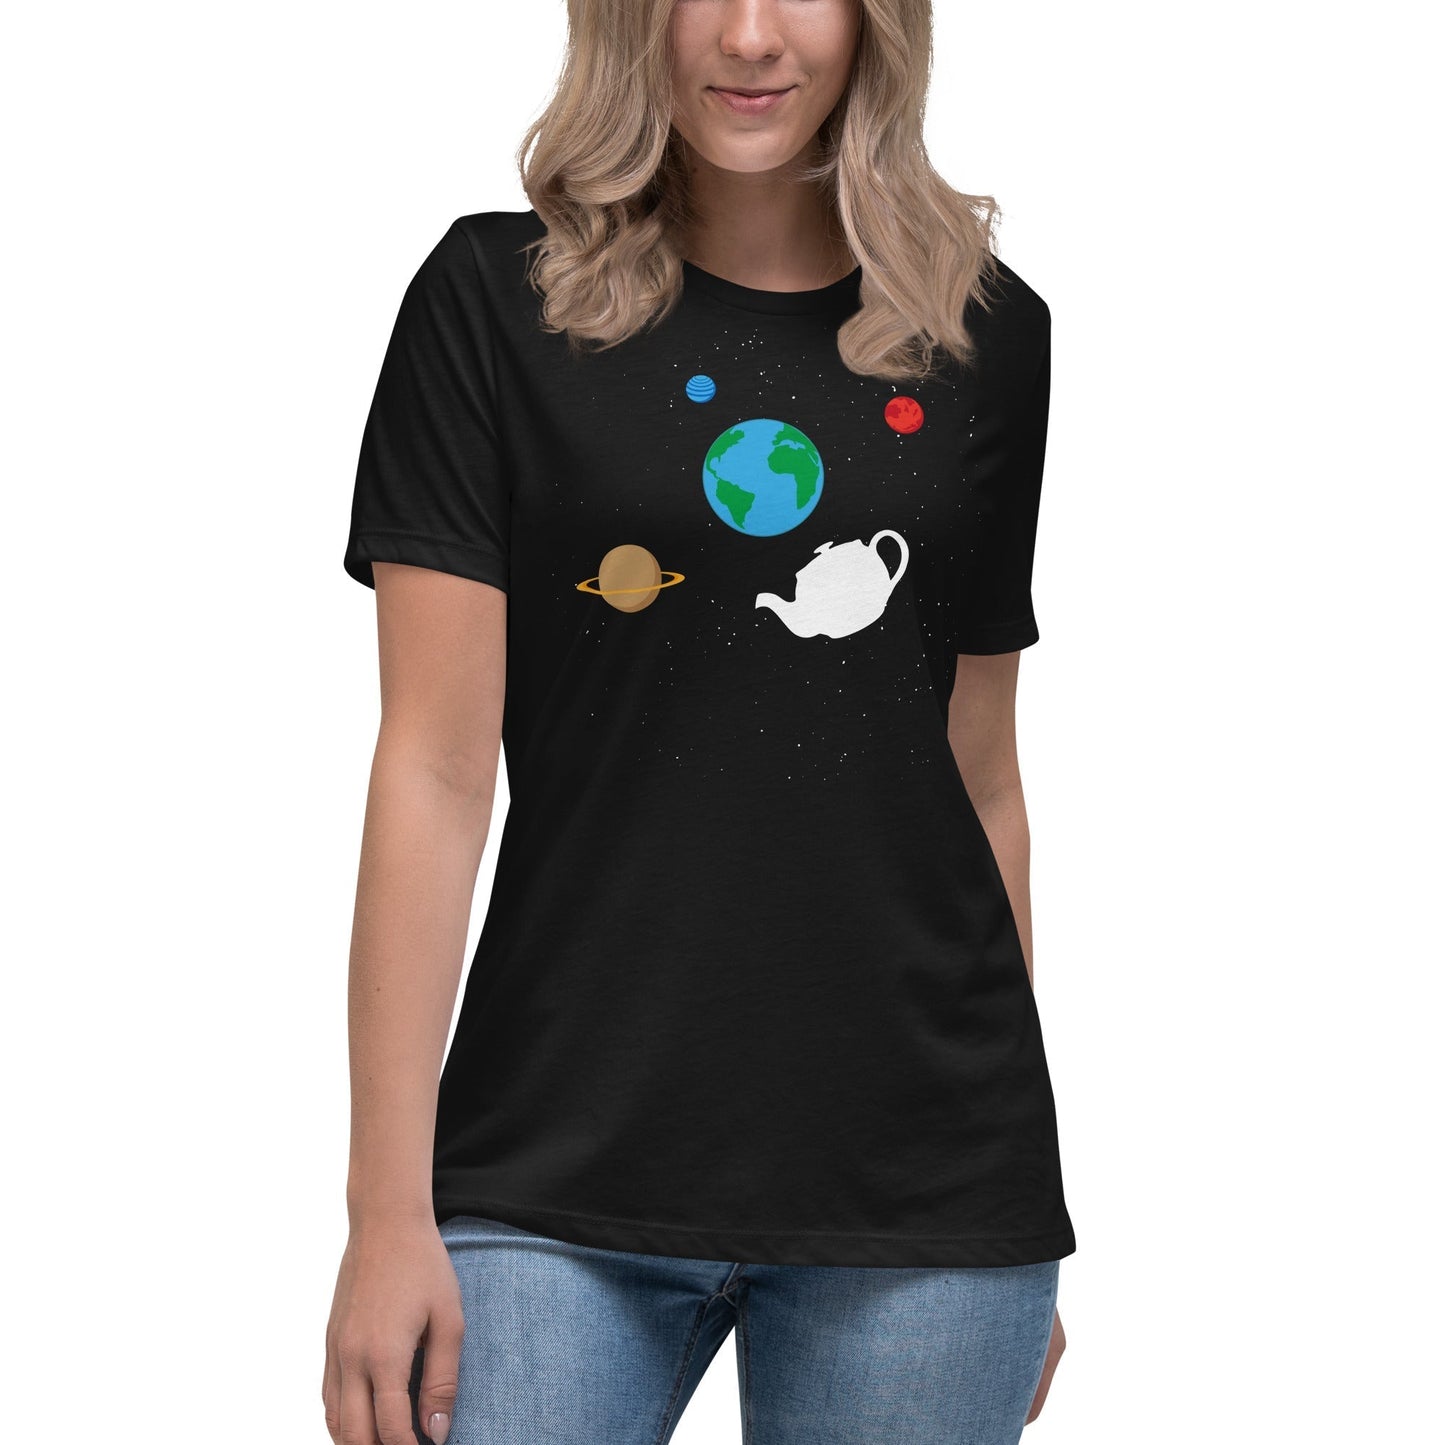 Russell's Teapot Floating in Space - Women's T-Shirt